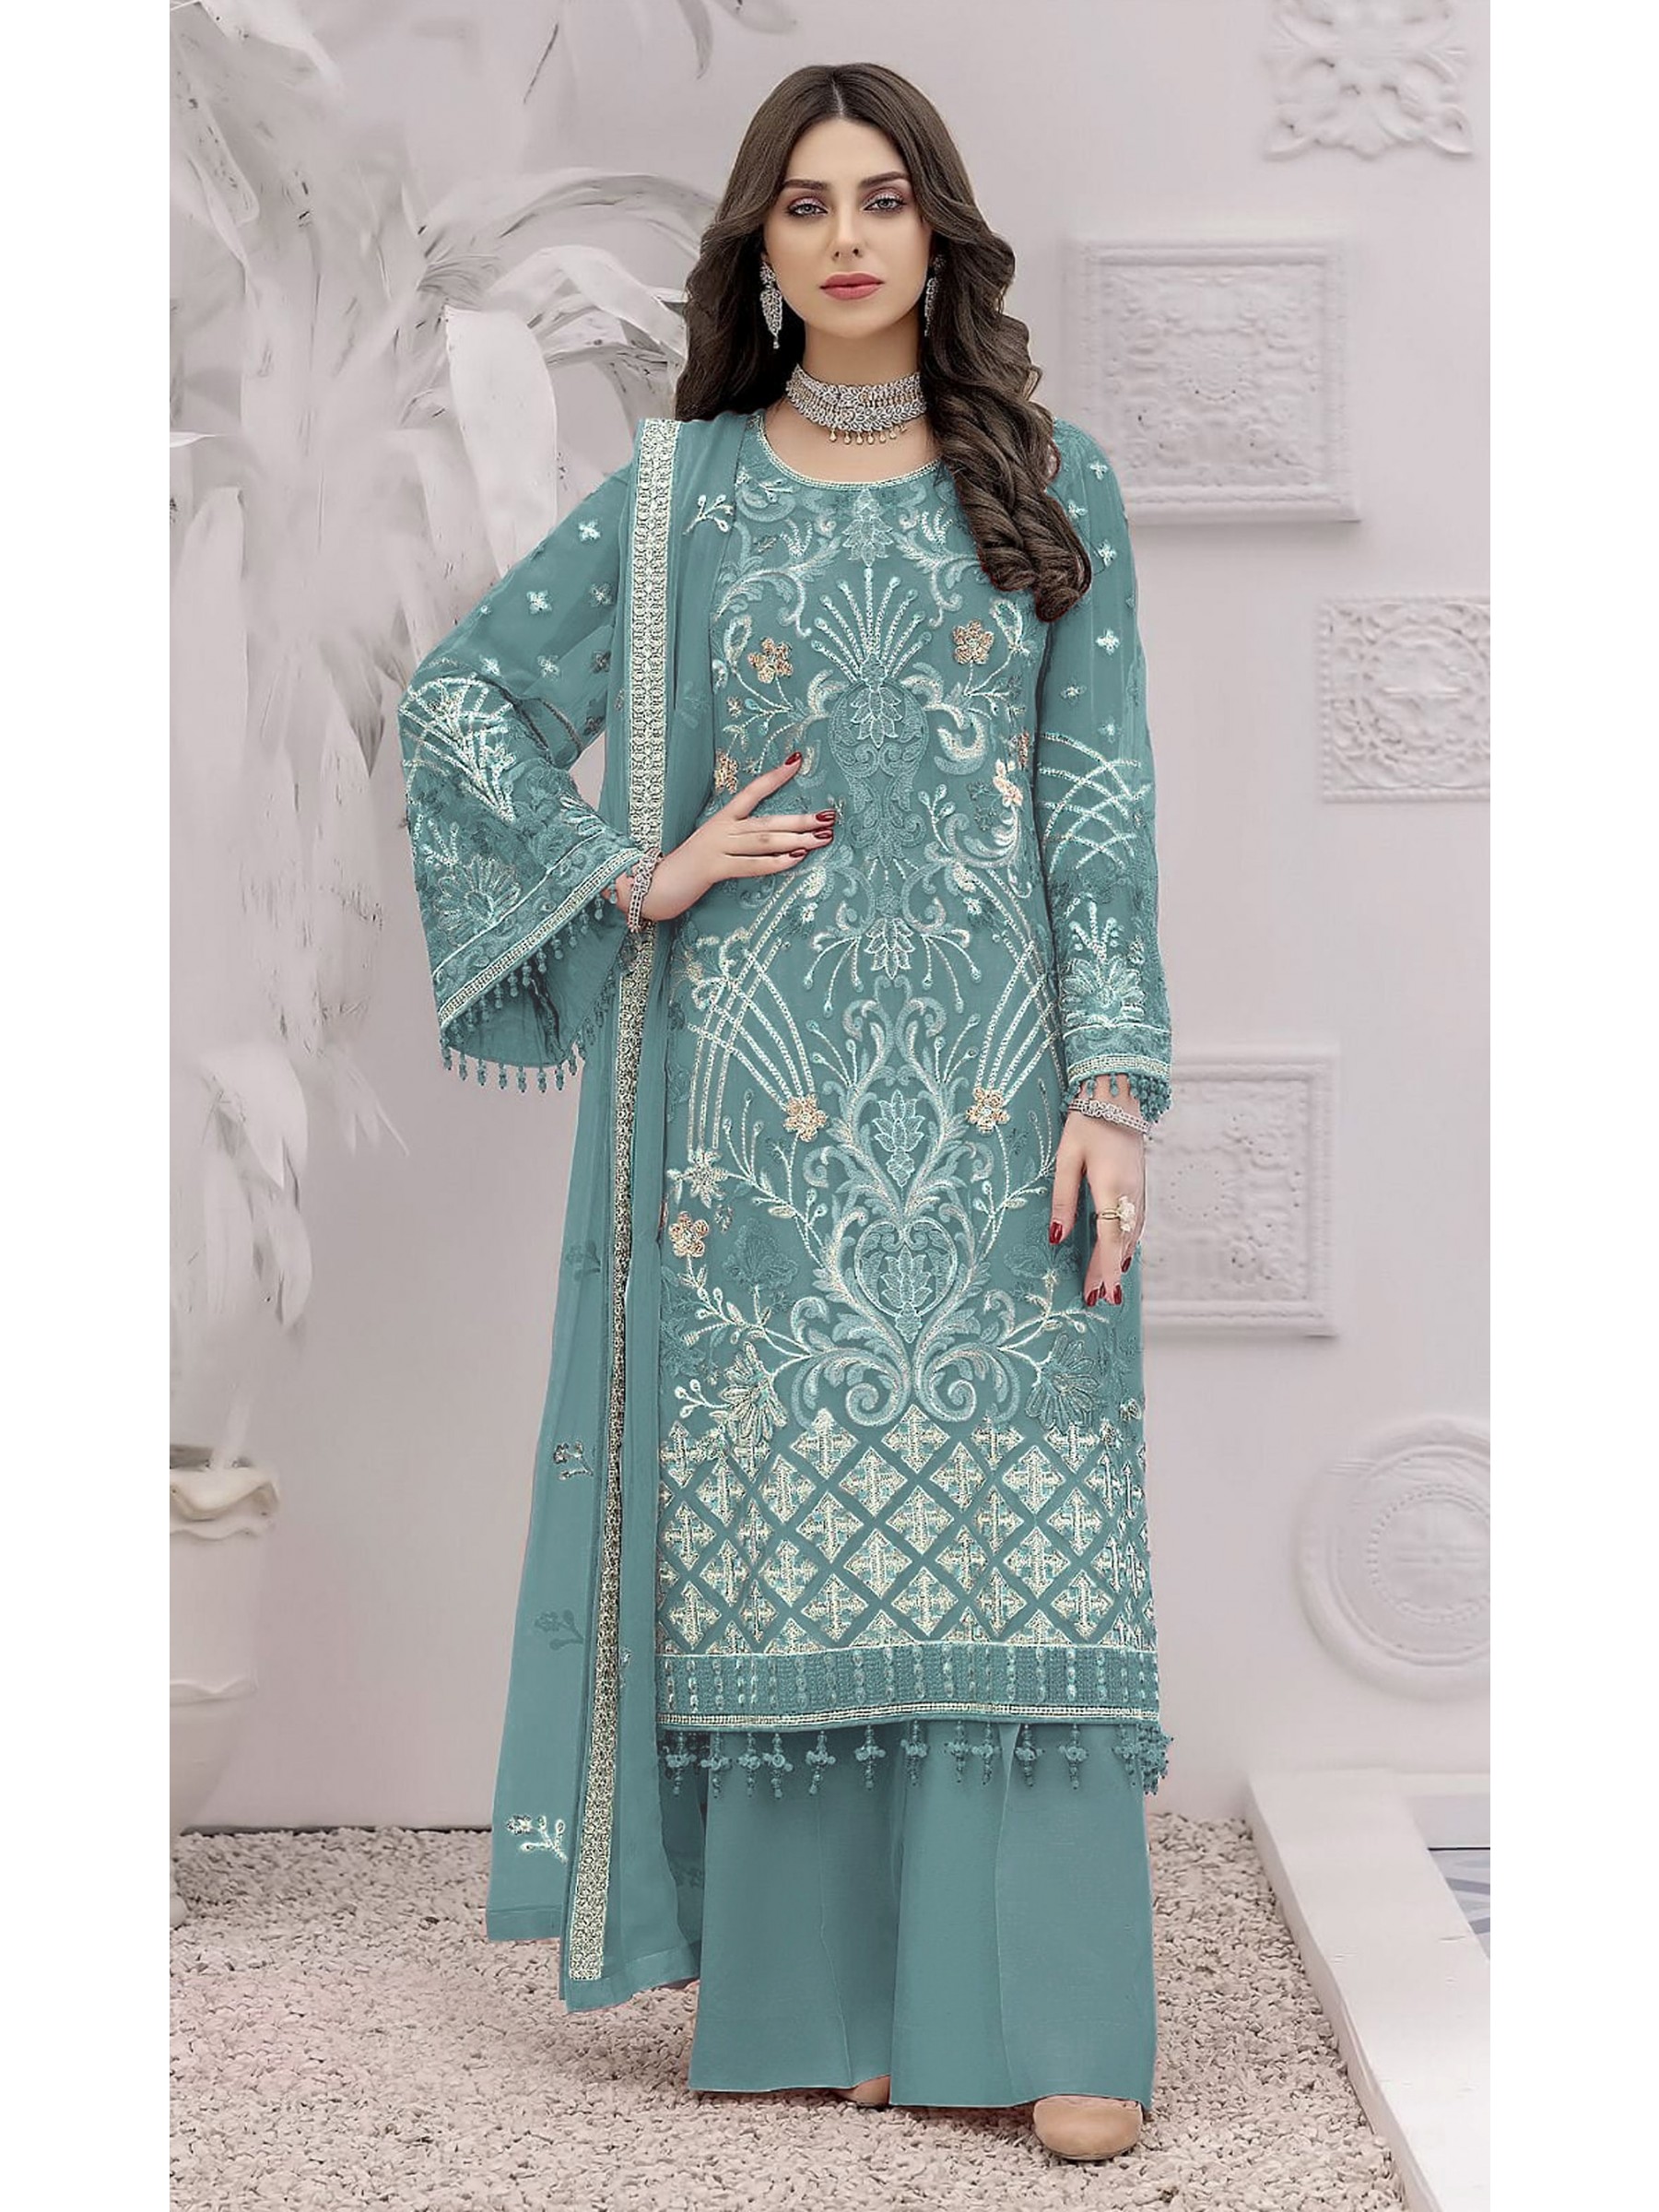 Georgette Silk Party Wear Suit in Pink Color with Embroidery Work